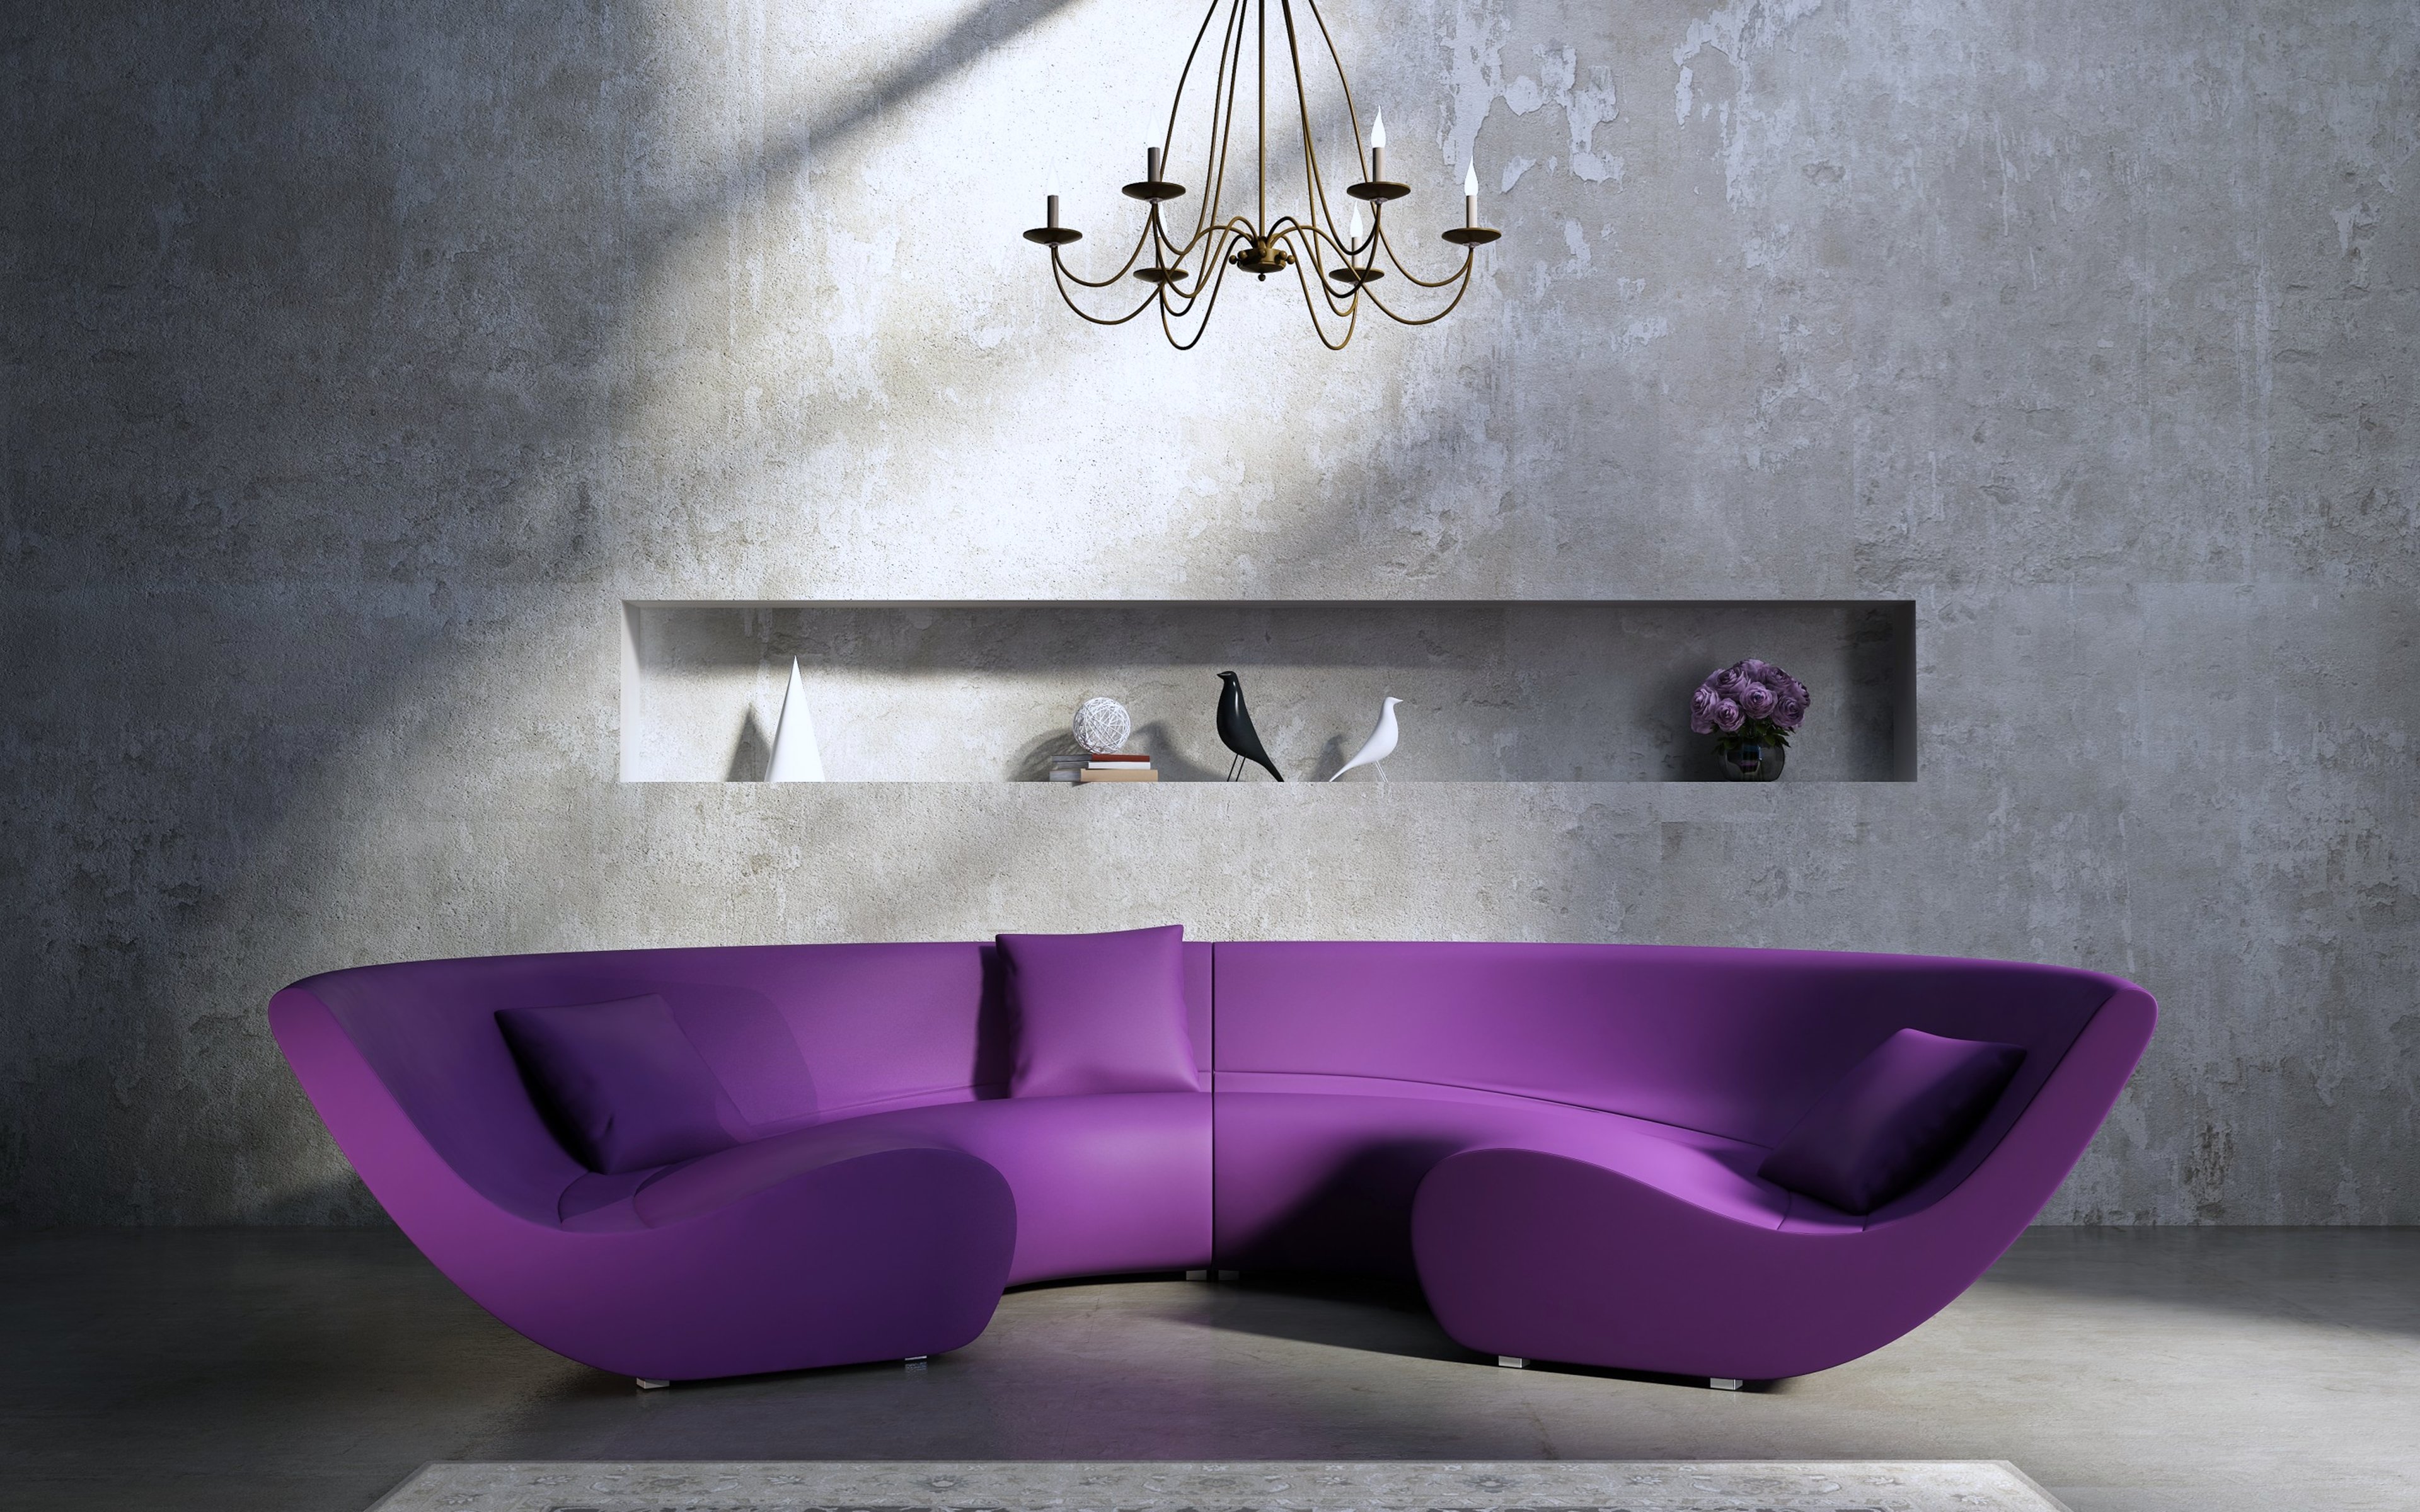 living, Room, Comfort, Curtains, Family, Fashion, Furniture, Garden, Happiness, Home, Interior, Landscape, Life, Luxury, Model, Relaxation, Technology, Villa, Wife, Purple Wallpaper